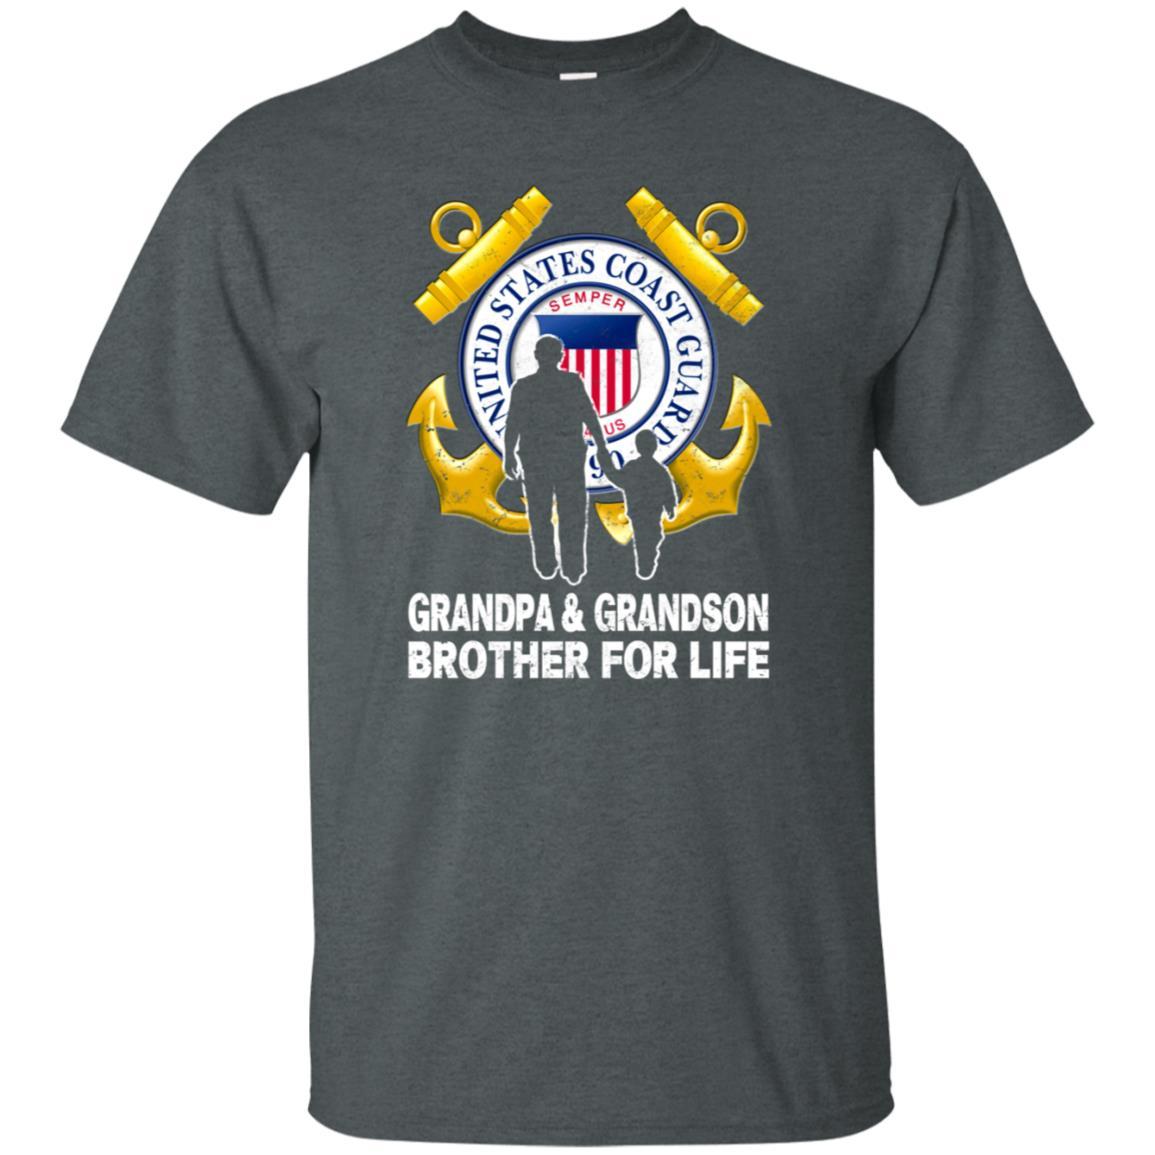 COAST GUARD GRANDPA AND GRANDDAUGHTER ( GRANDSON ) BROTHER FOR LIFE T-Shirt On Front-TShirt-USCG-Veterans Nation